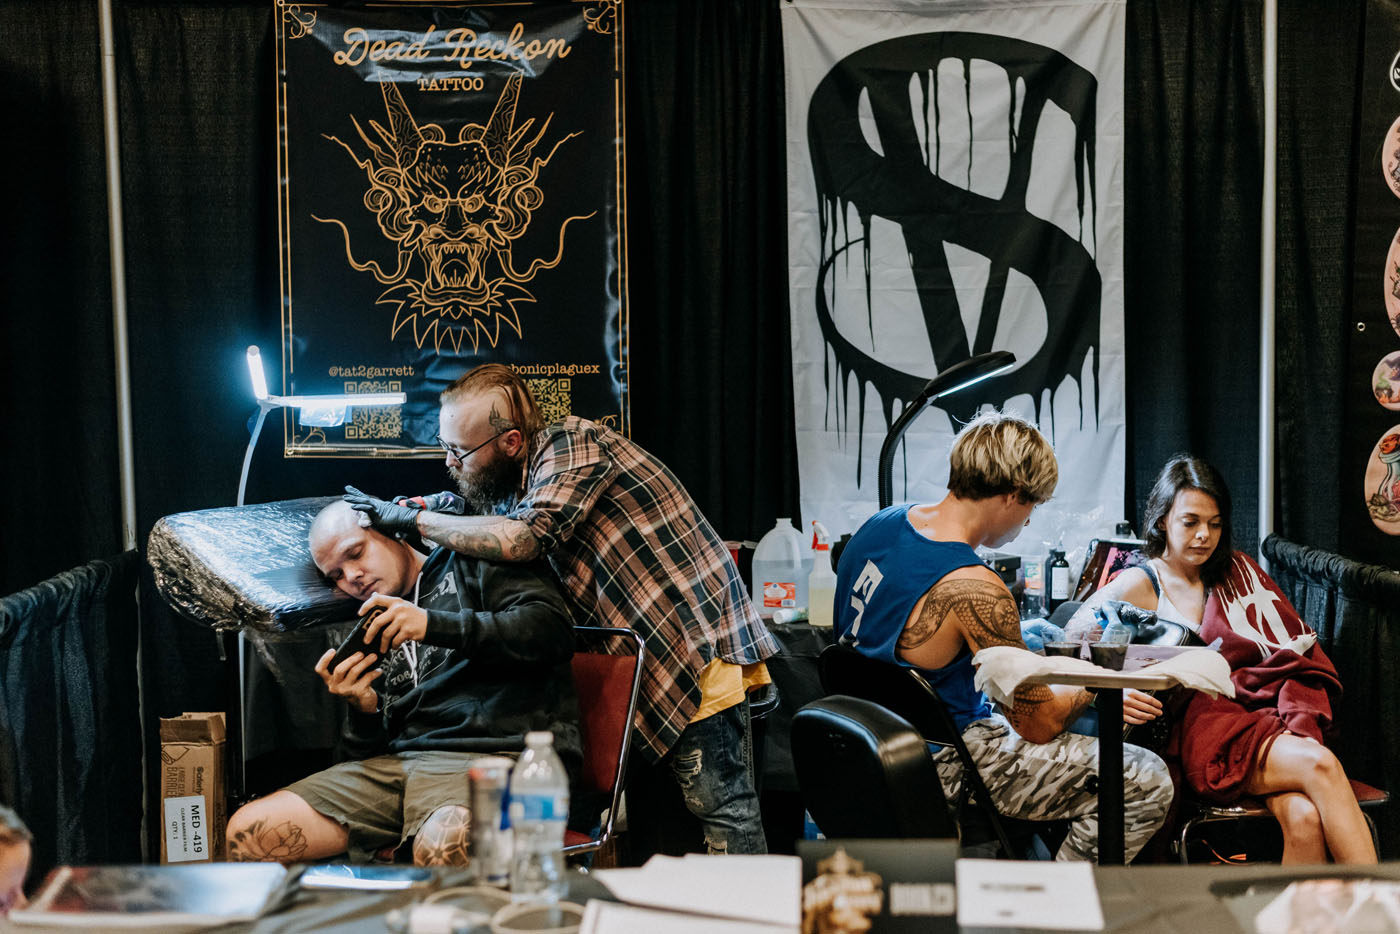 PHOTOS Ink flying at Electric City Tattoo Convention  News   citizensvoicecom